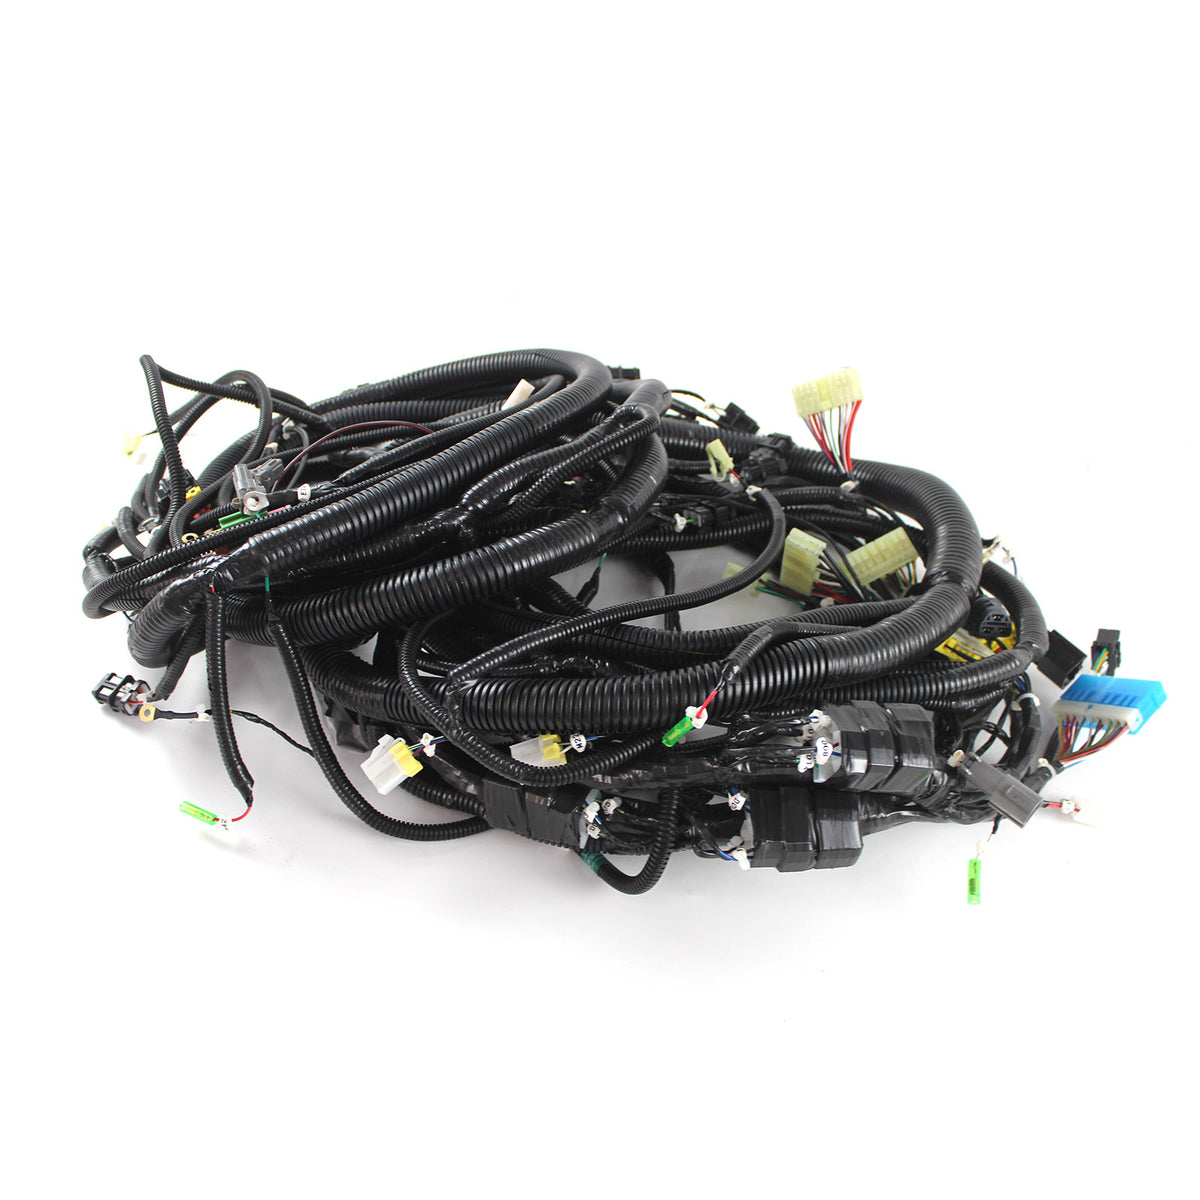 20Y-06-24911 20Y-06-24910 Wiring Harness for PC200-6 PC210-6 PC220-6